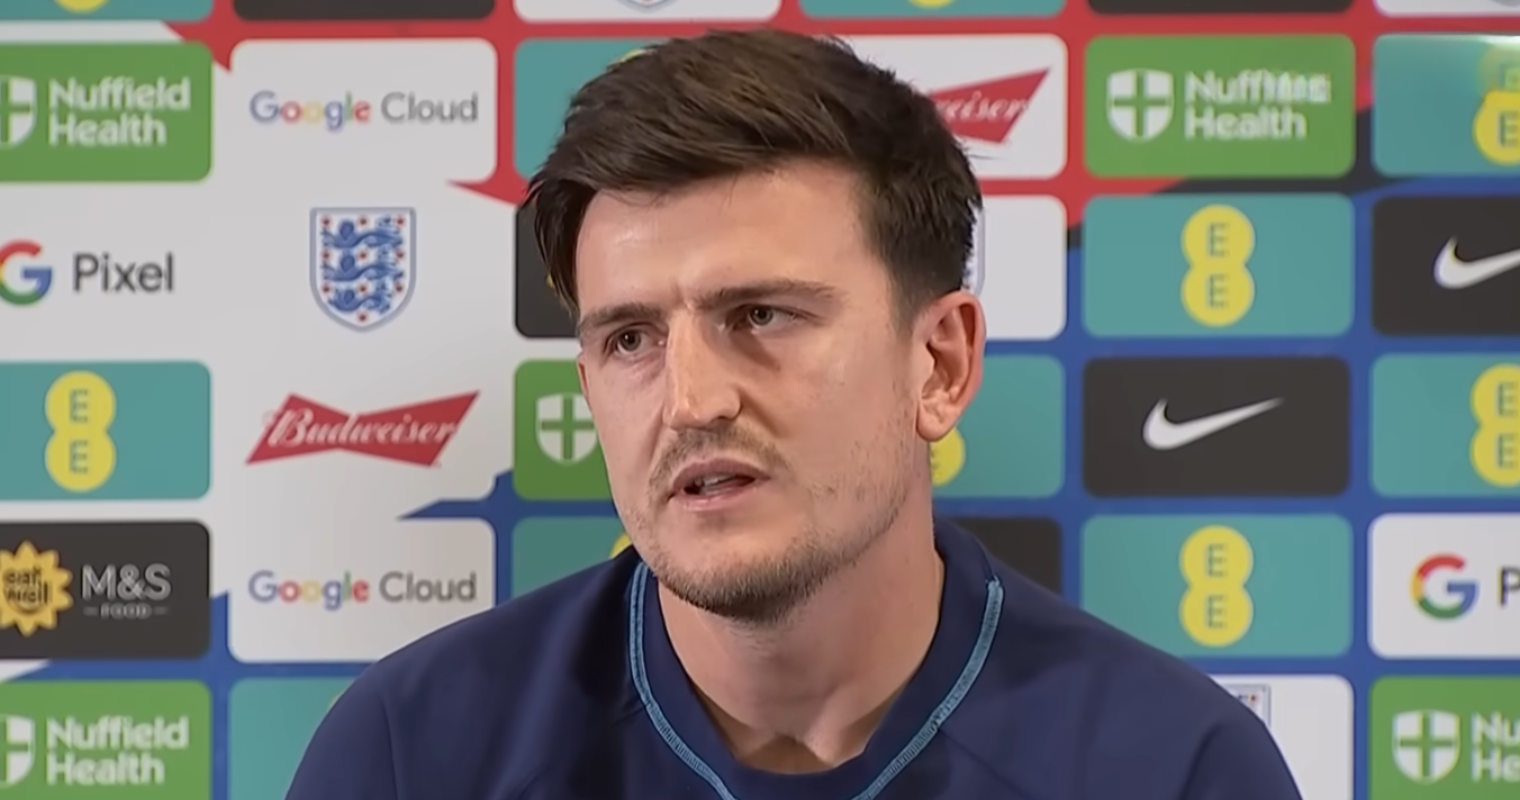 David Beckham called Harry Maguire with support after abuse